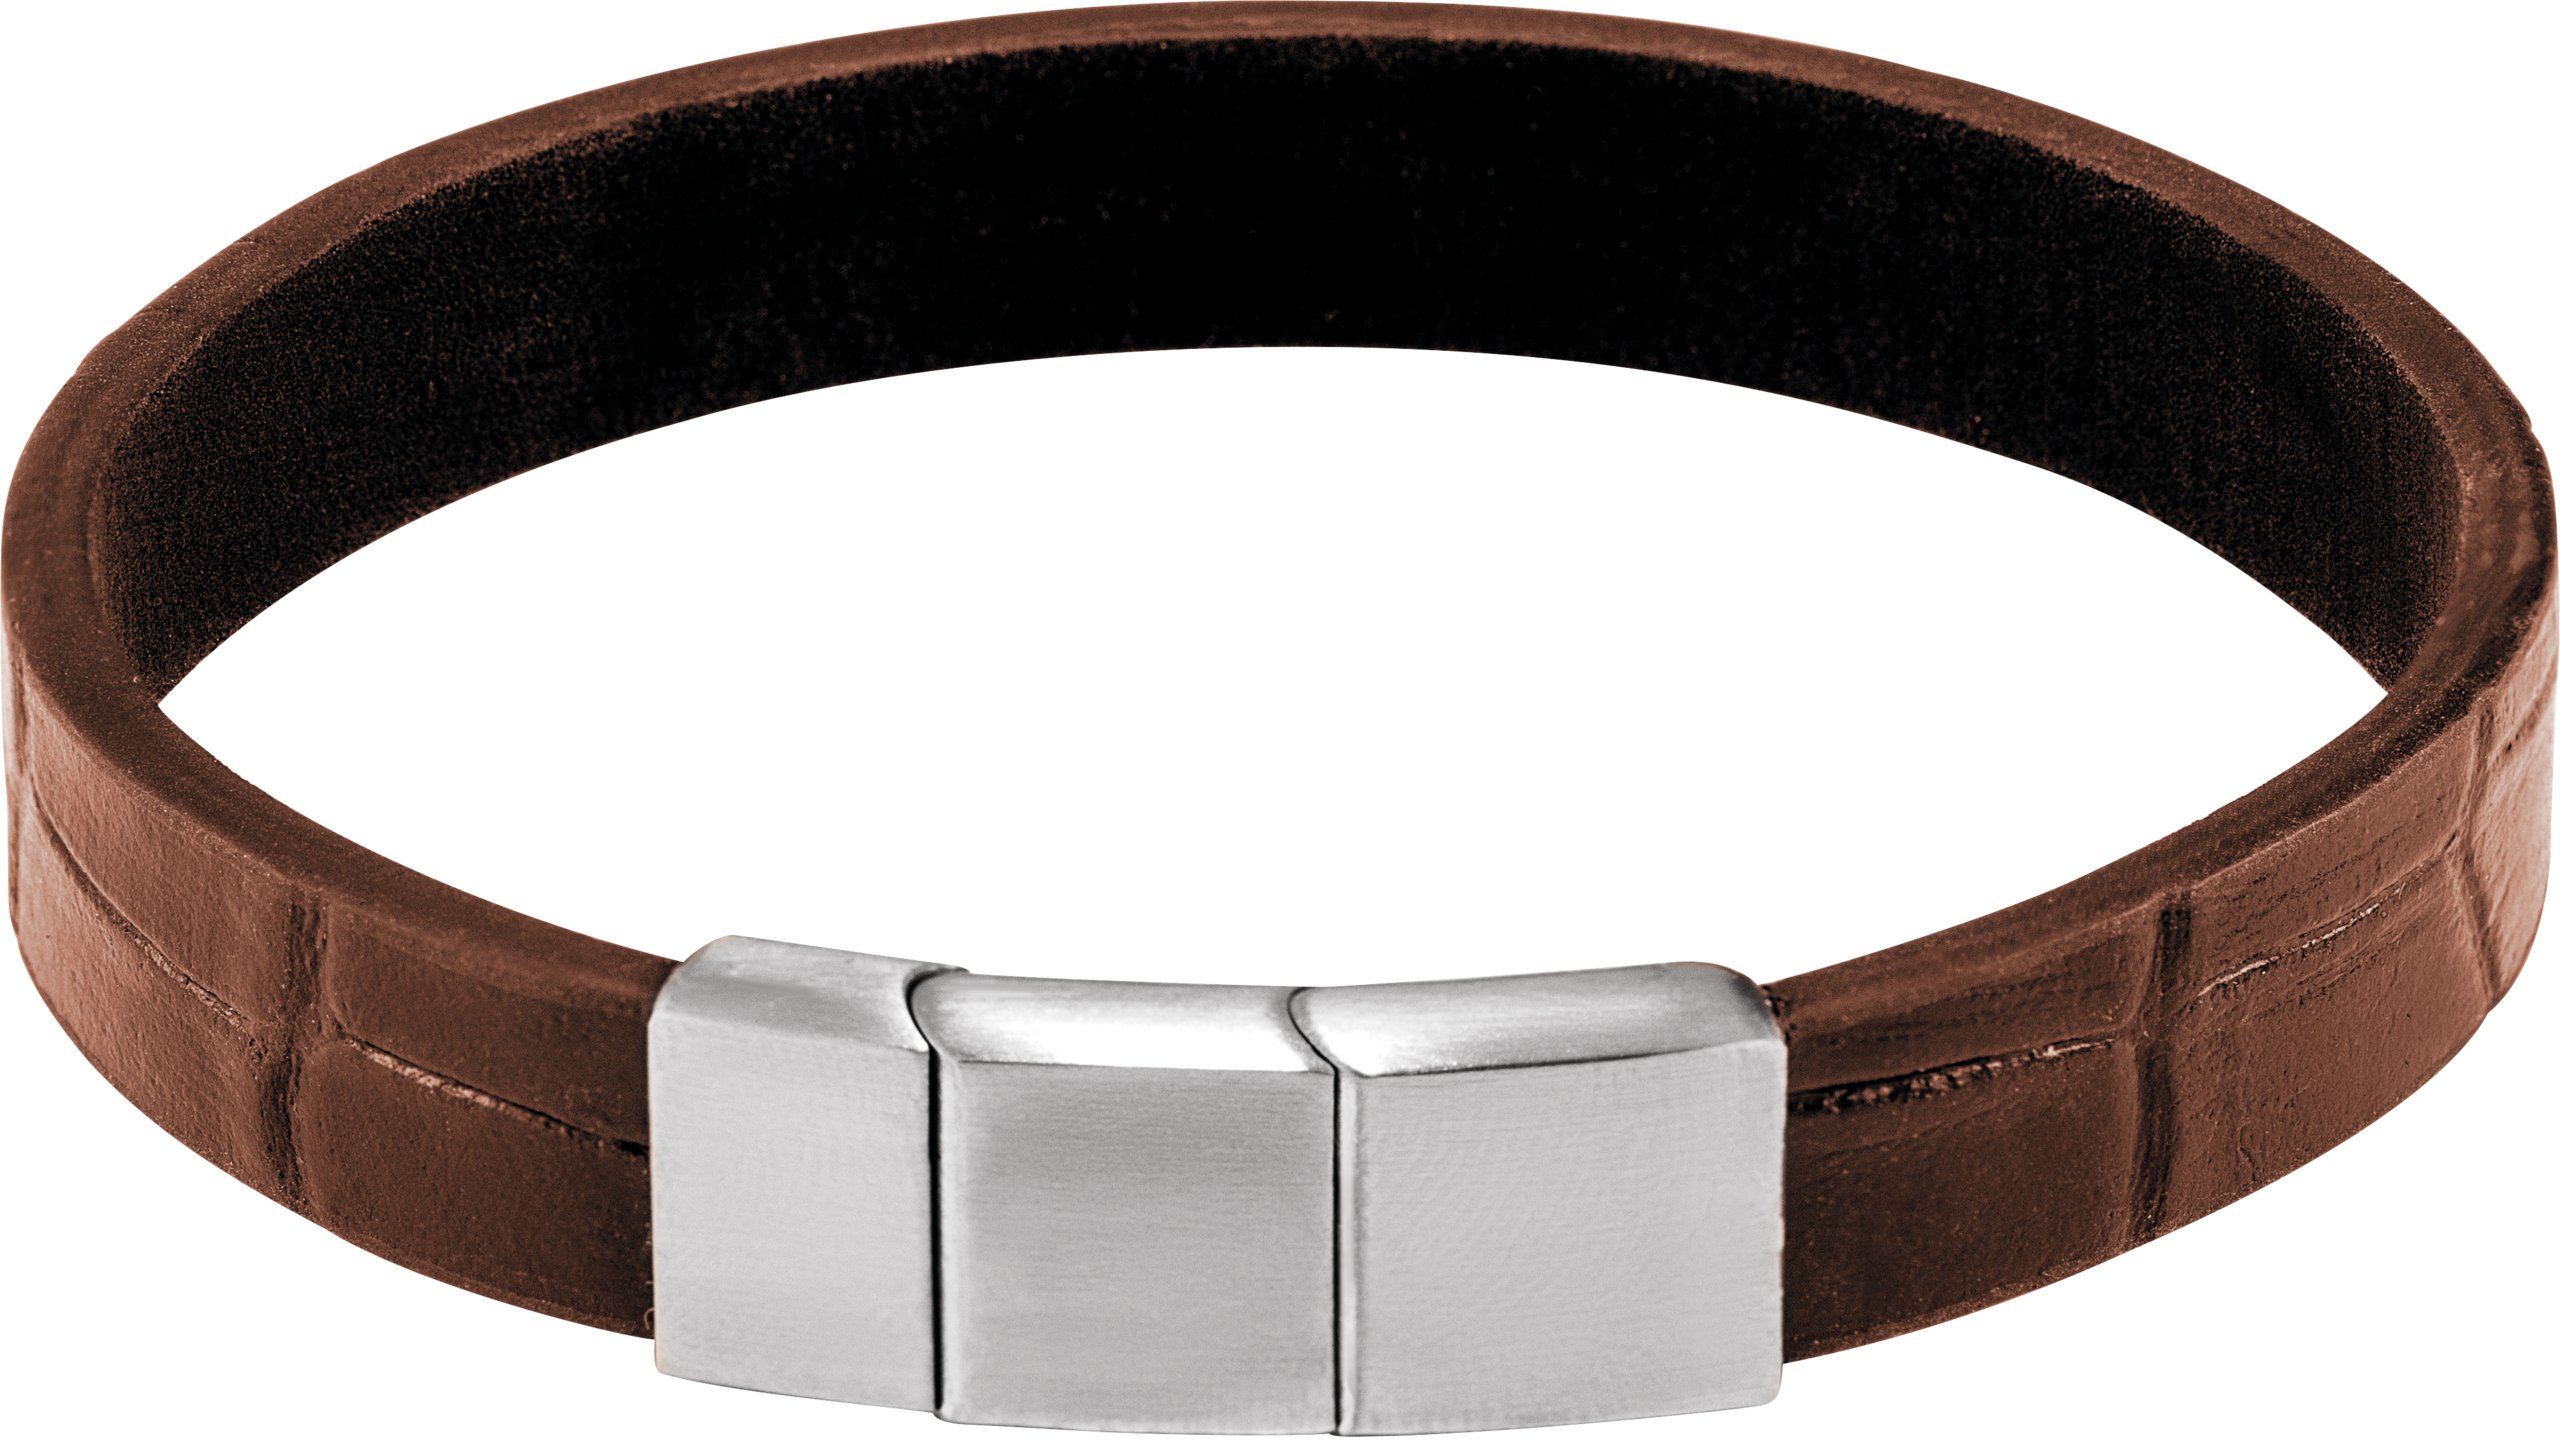 Stainless Steel 11 mm Brown Leather 8 1/2" Bracelet